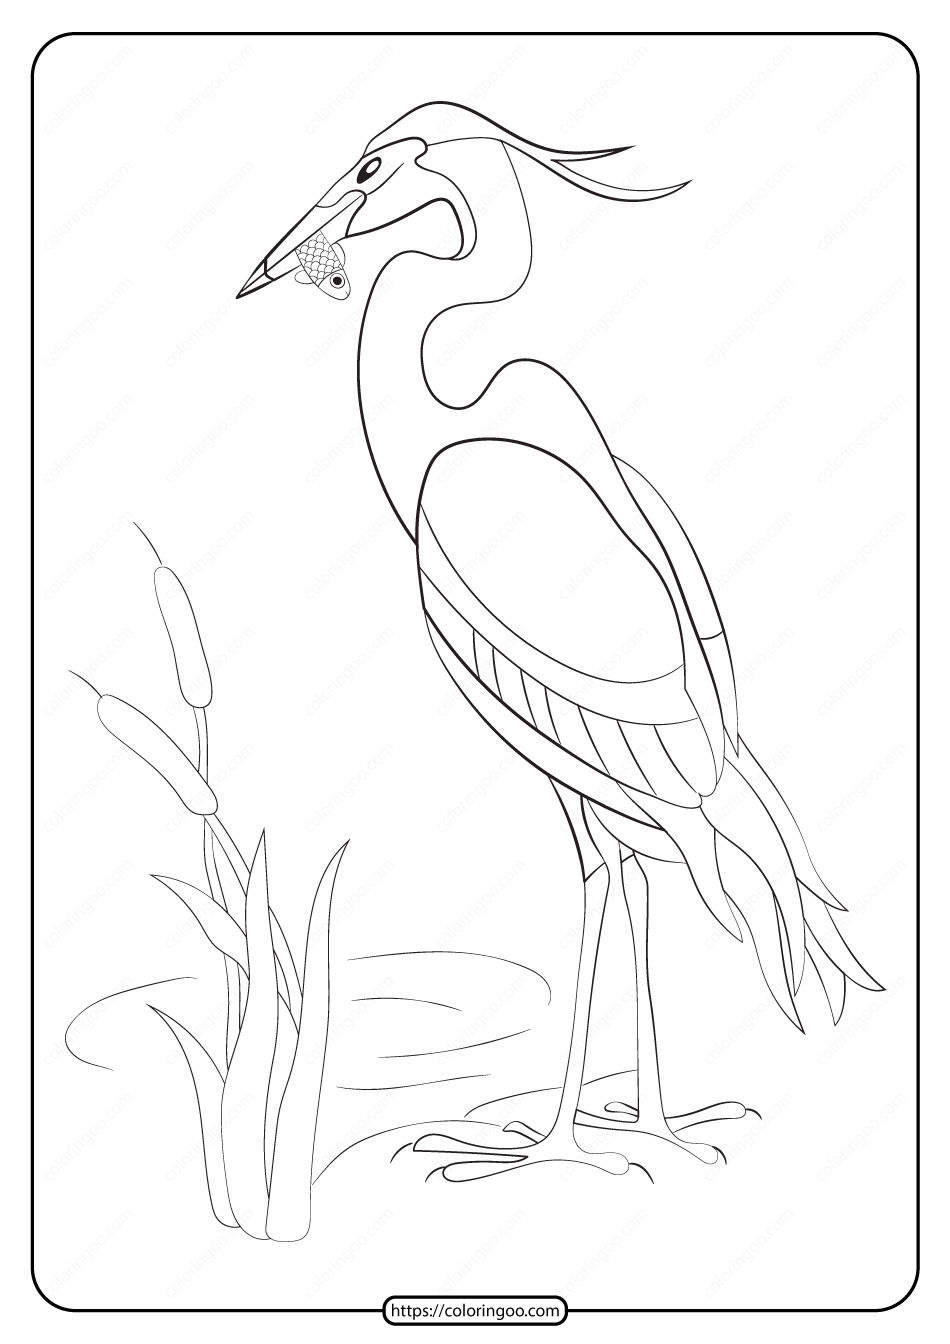 Free Printable Animals Heron Pdf Coloring Page | Bird coloring pages,  Colorful animal paintings, Animal coloring pages